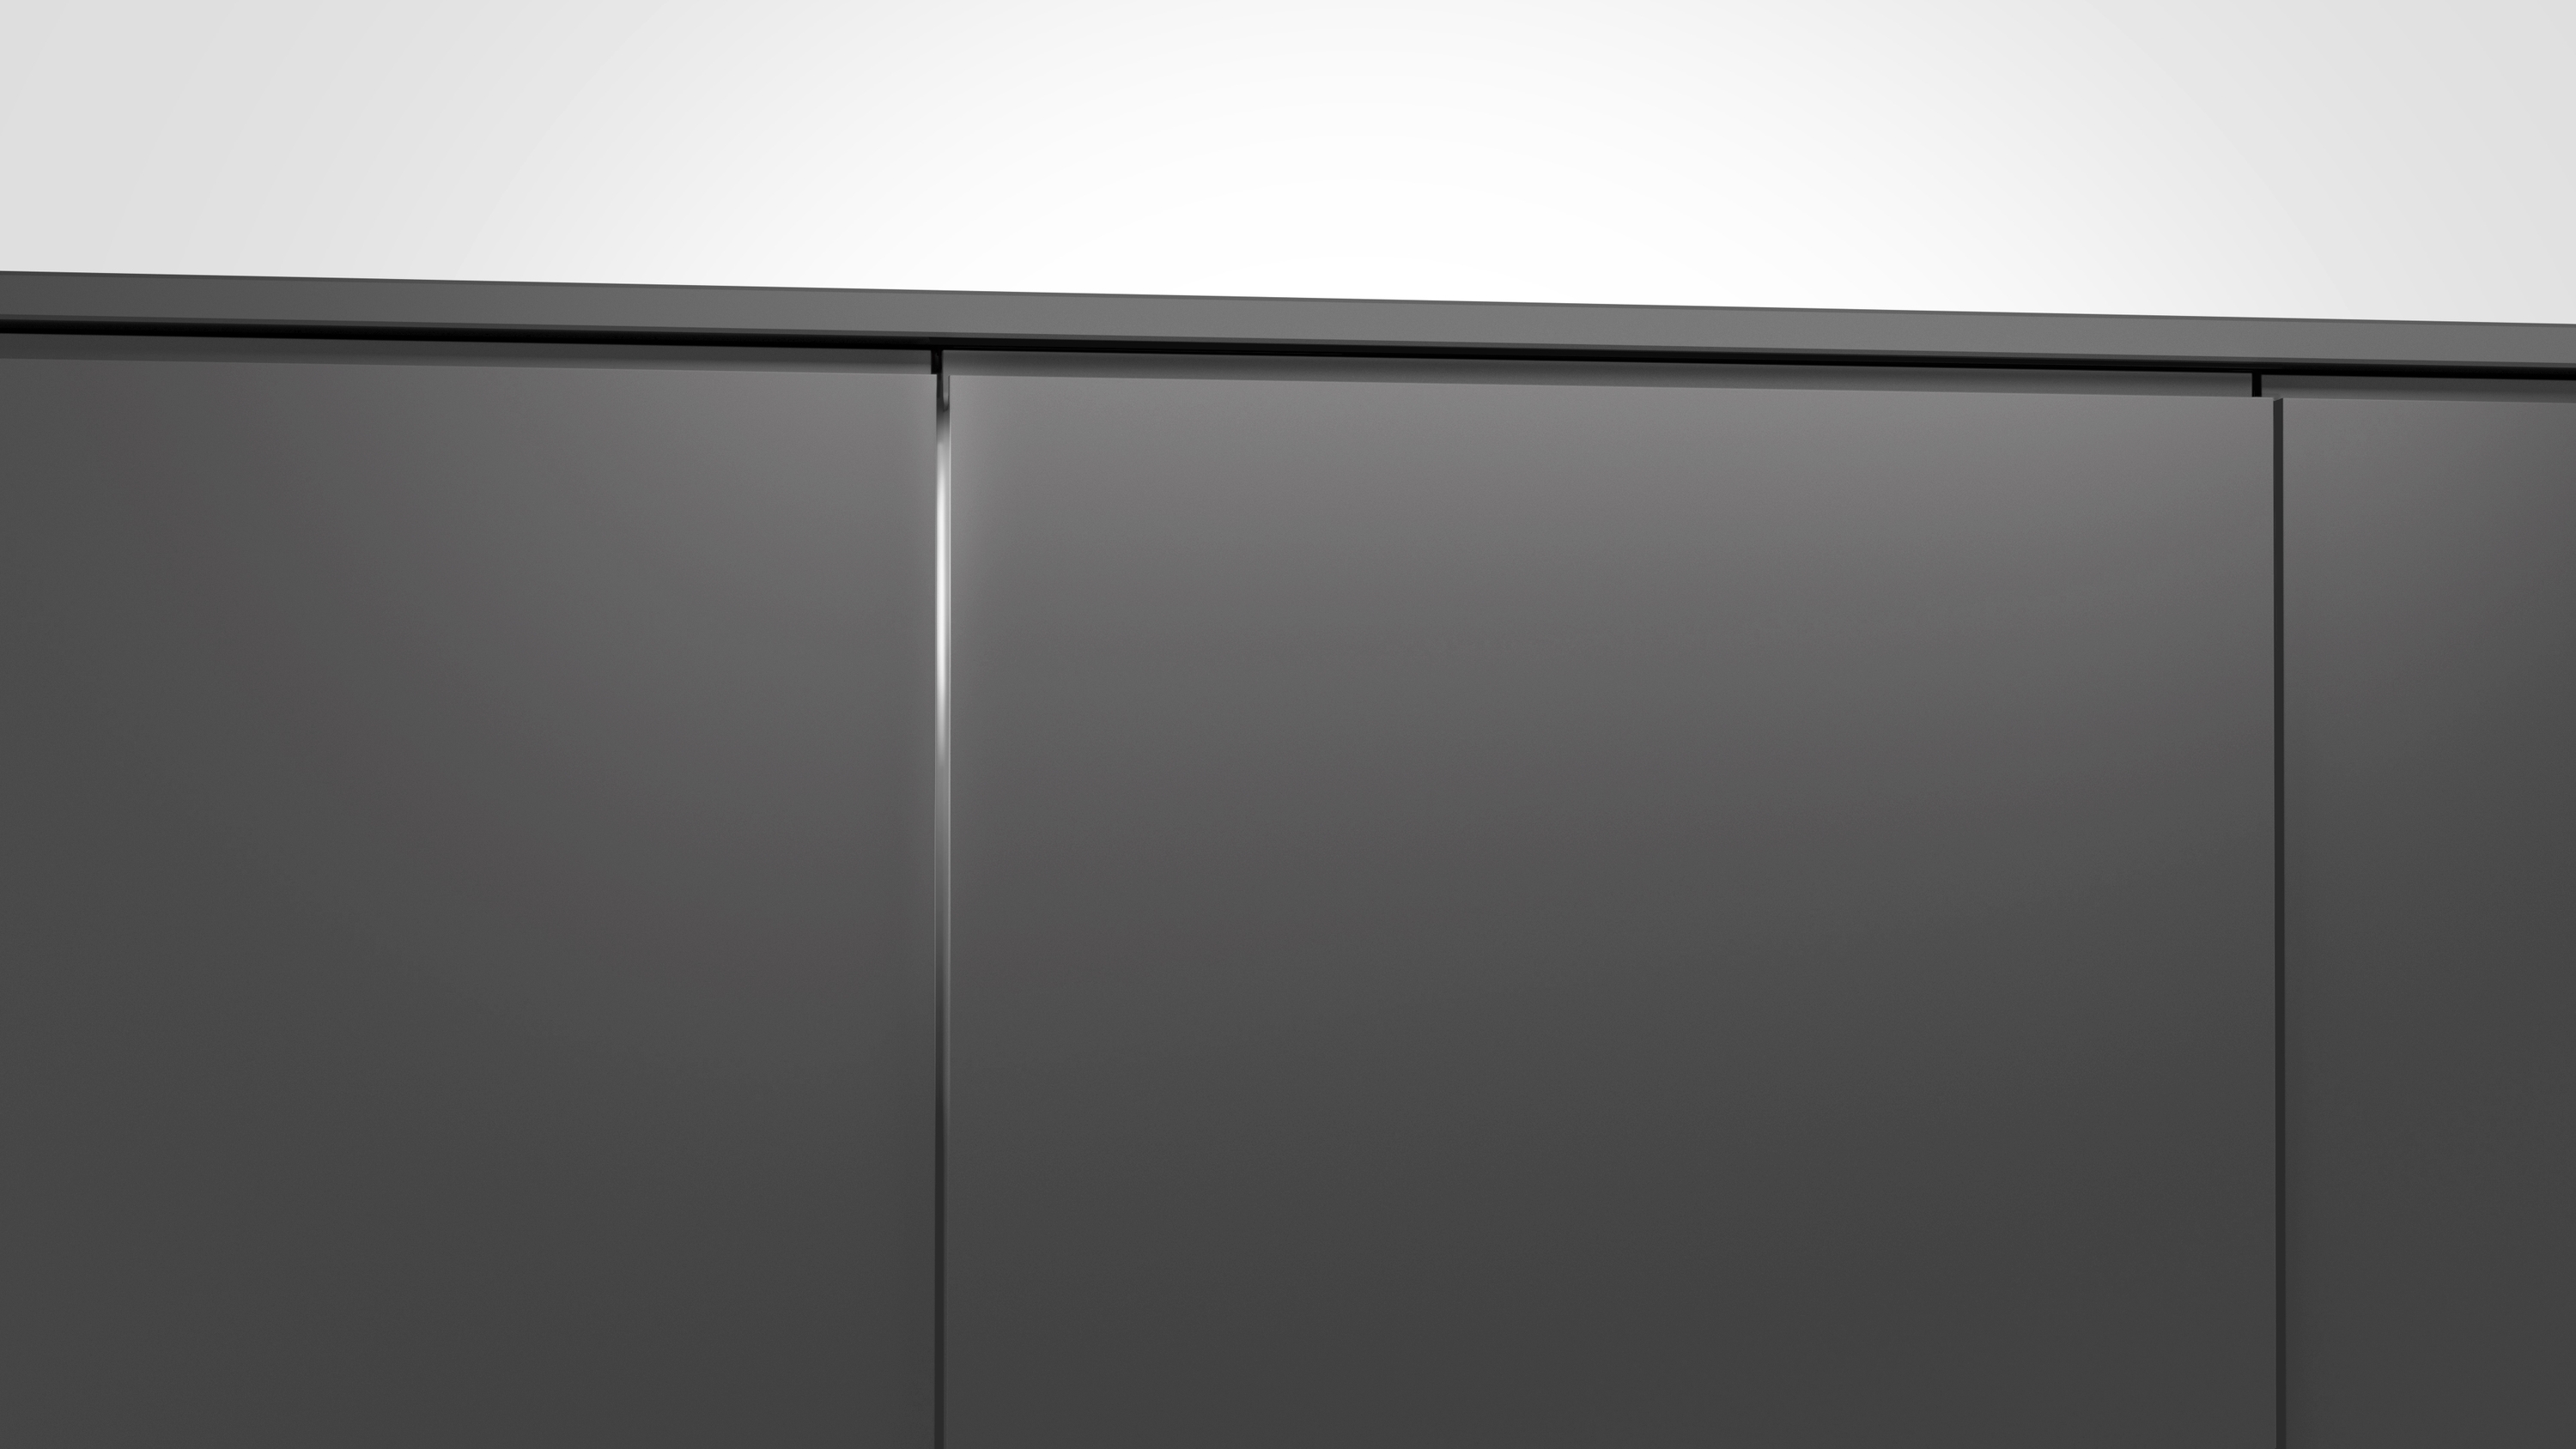 Series 4, fully-integrated dishwasher, 60 cm, Variable hinge for special installation situations, SMH4HCX19E